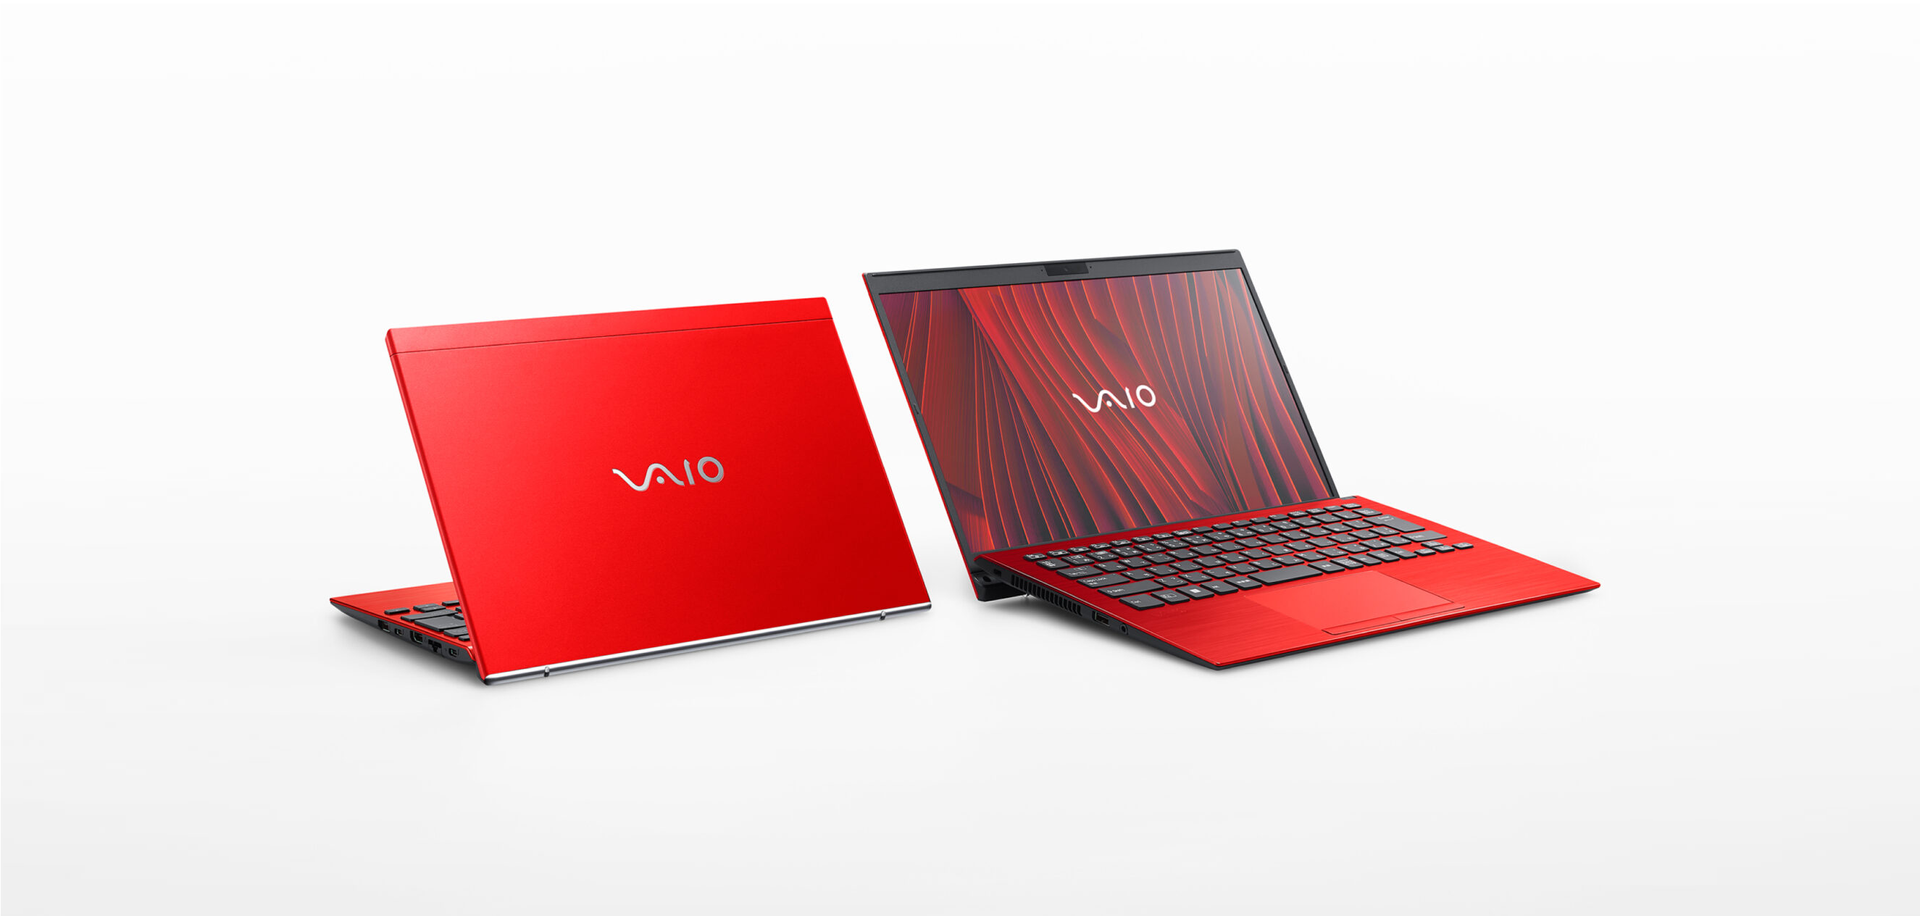 Education discounts on VAIO laptops for teachers, faculty, school staff and students.